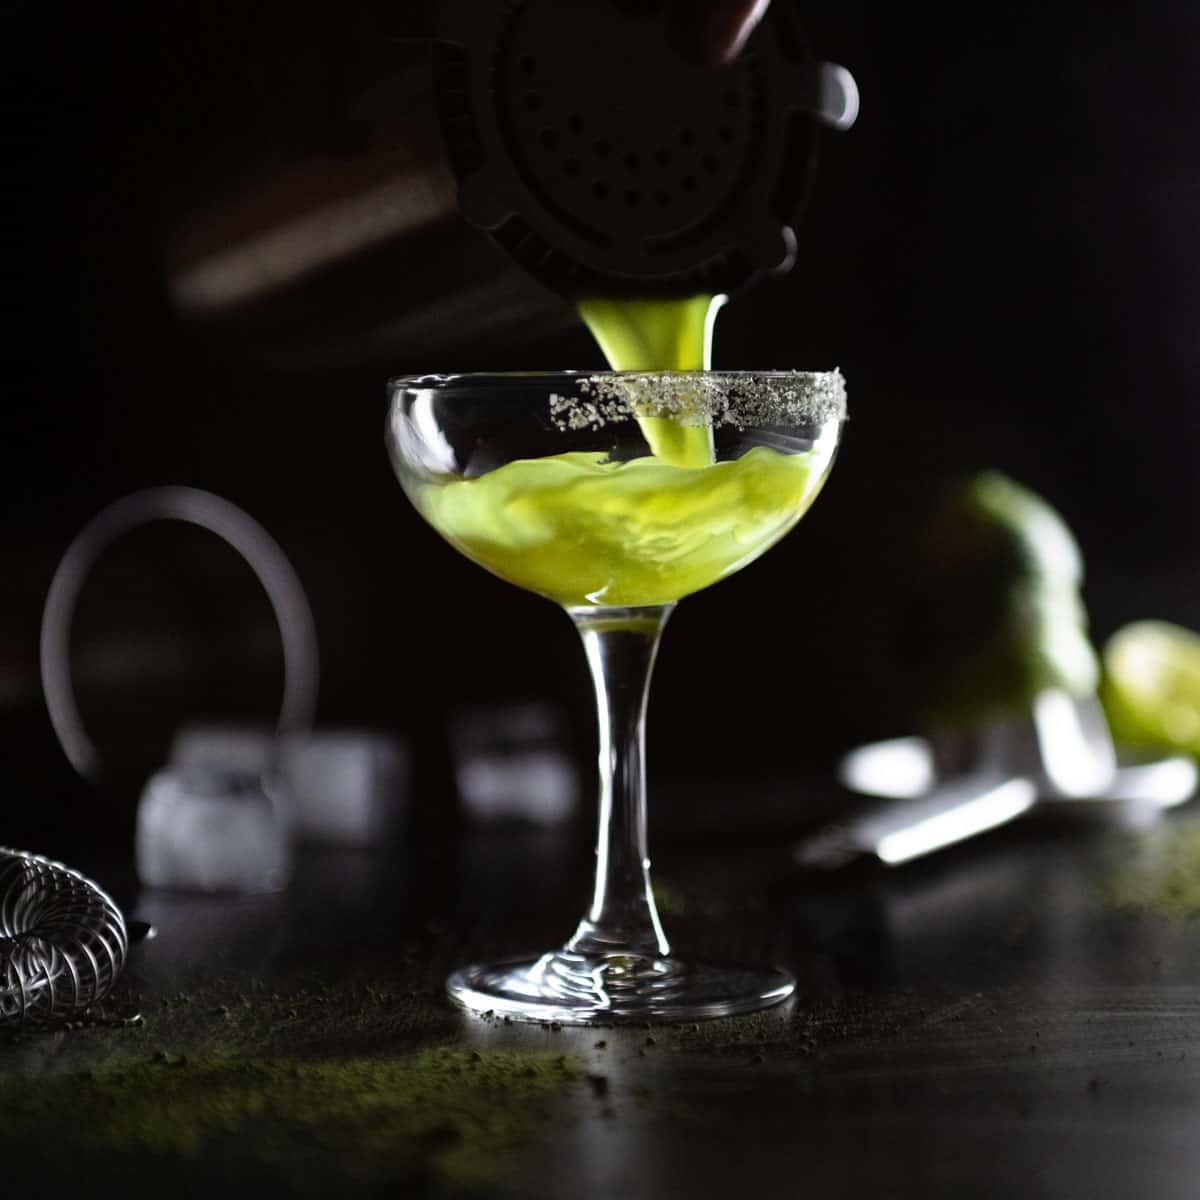 pouring the matcha margarita from a cocktail shaker into the matcha salted coupe glass.